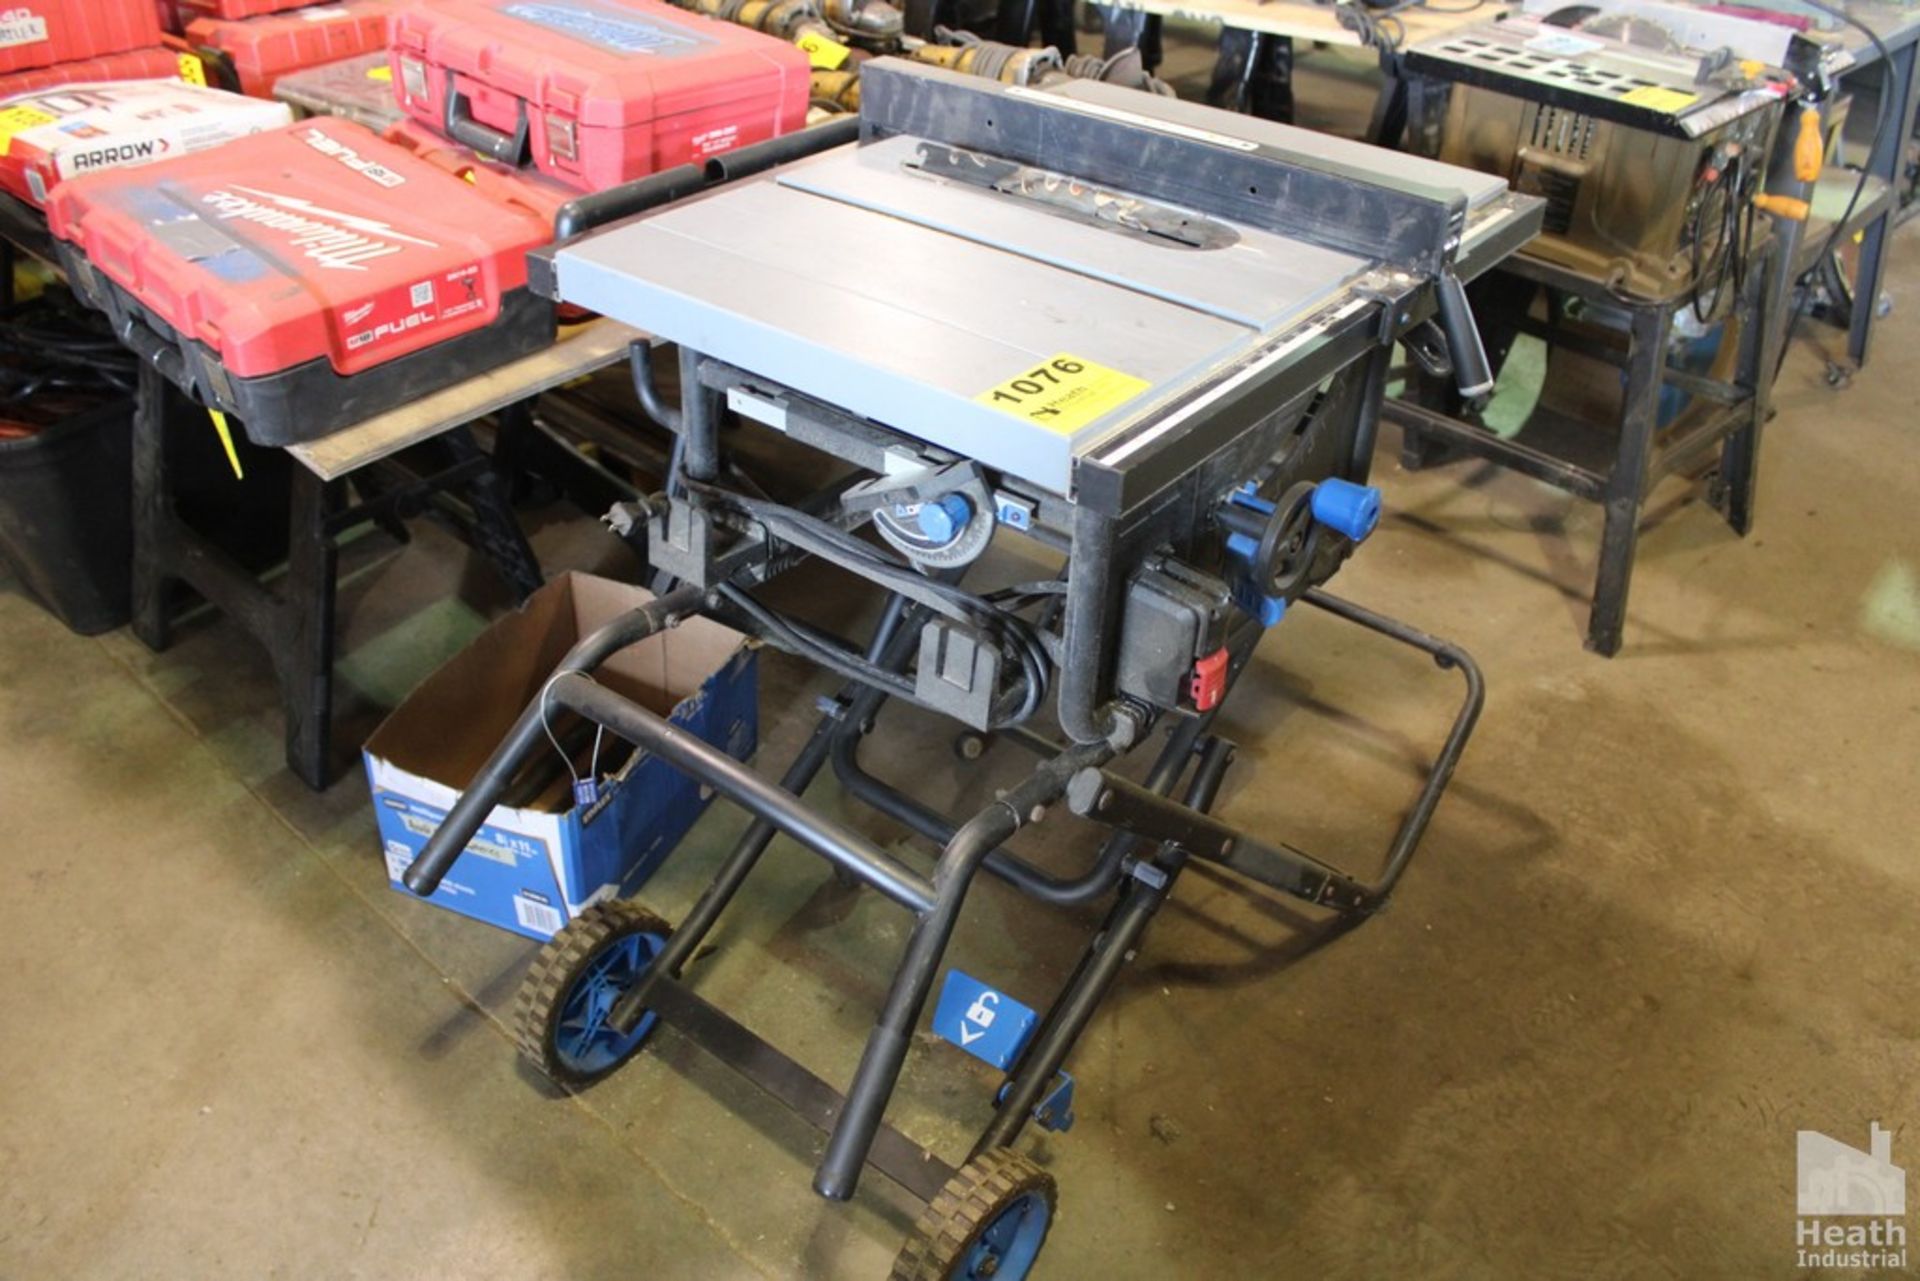 DELTA 10" TABLE SAW MODEL 36-6022 WITH PORTABLE COLLAPSIBLE CART - Image 3 of 3